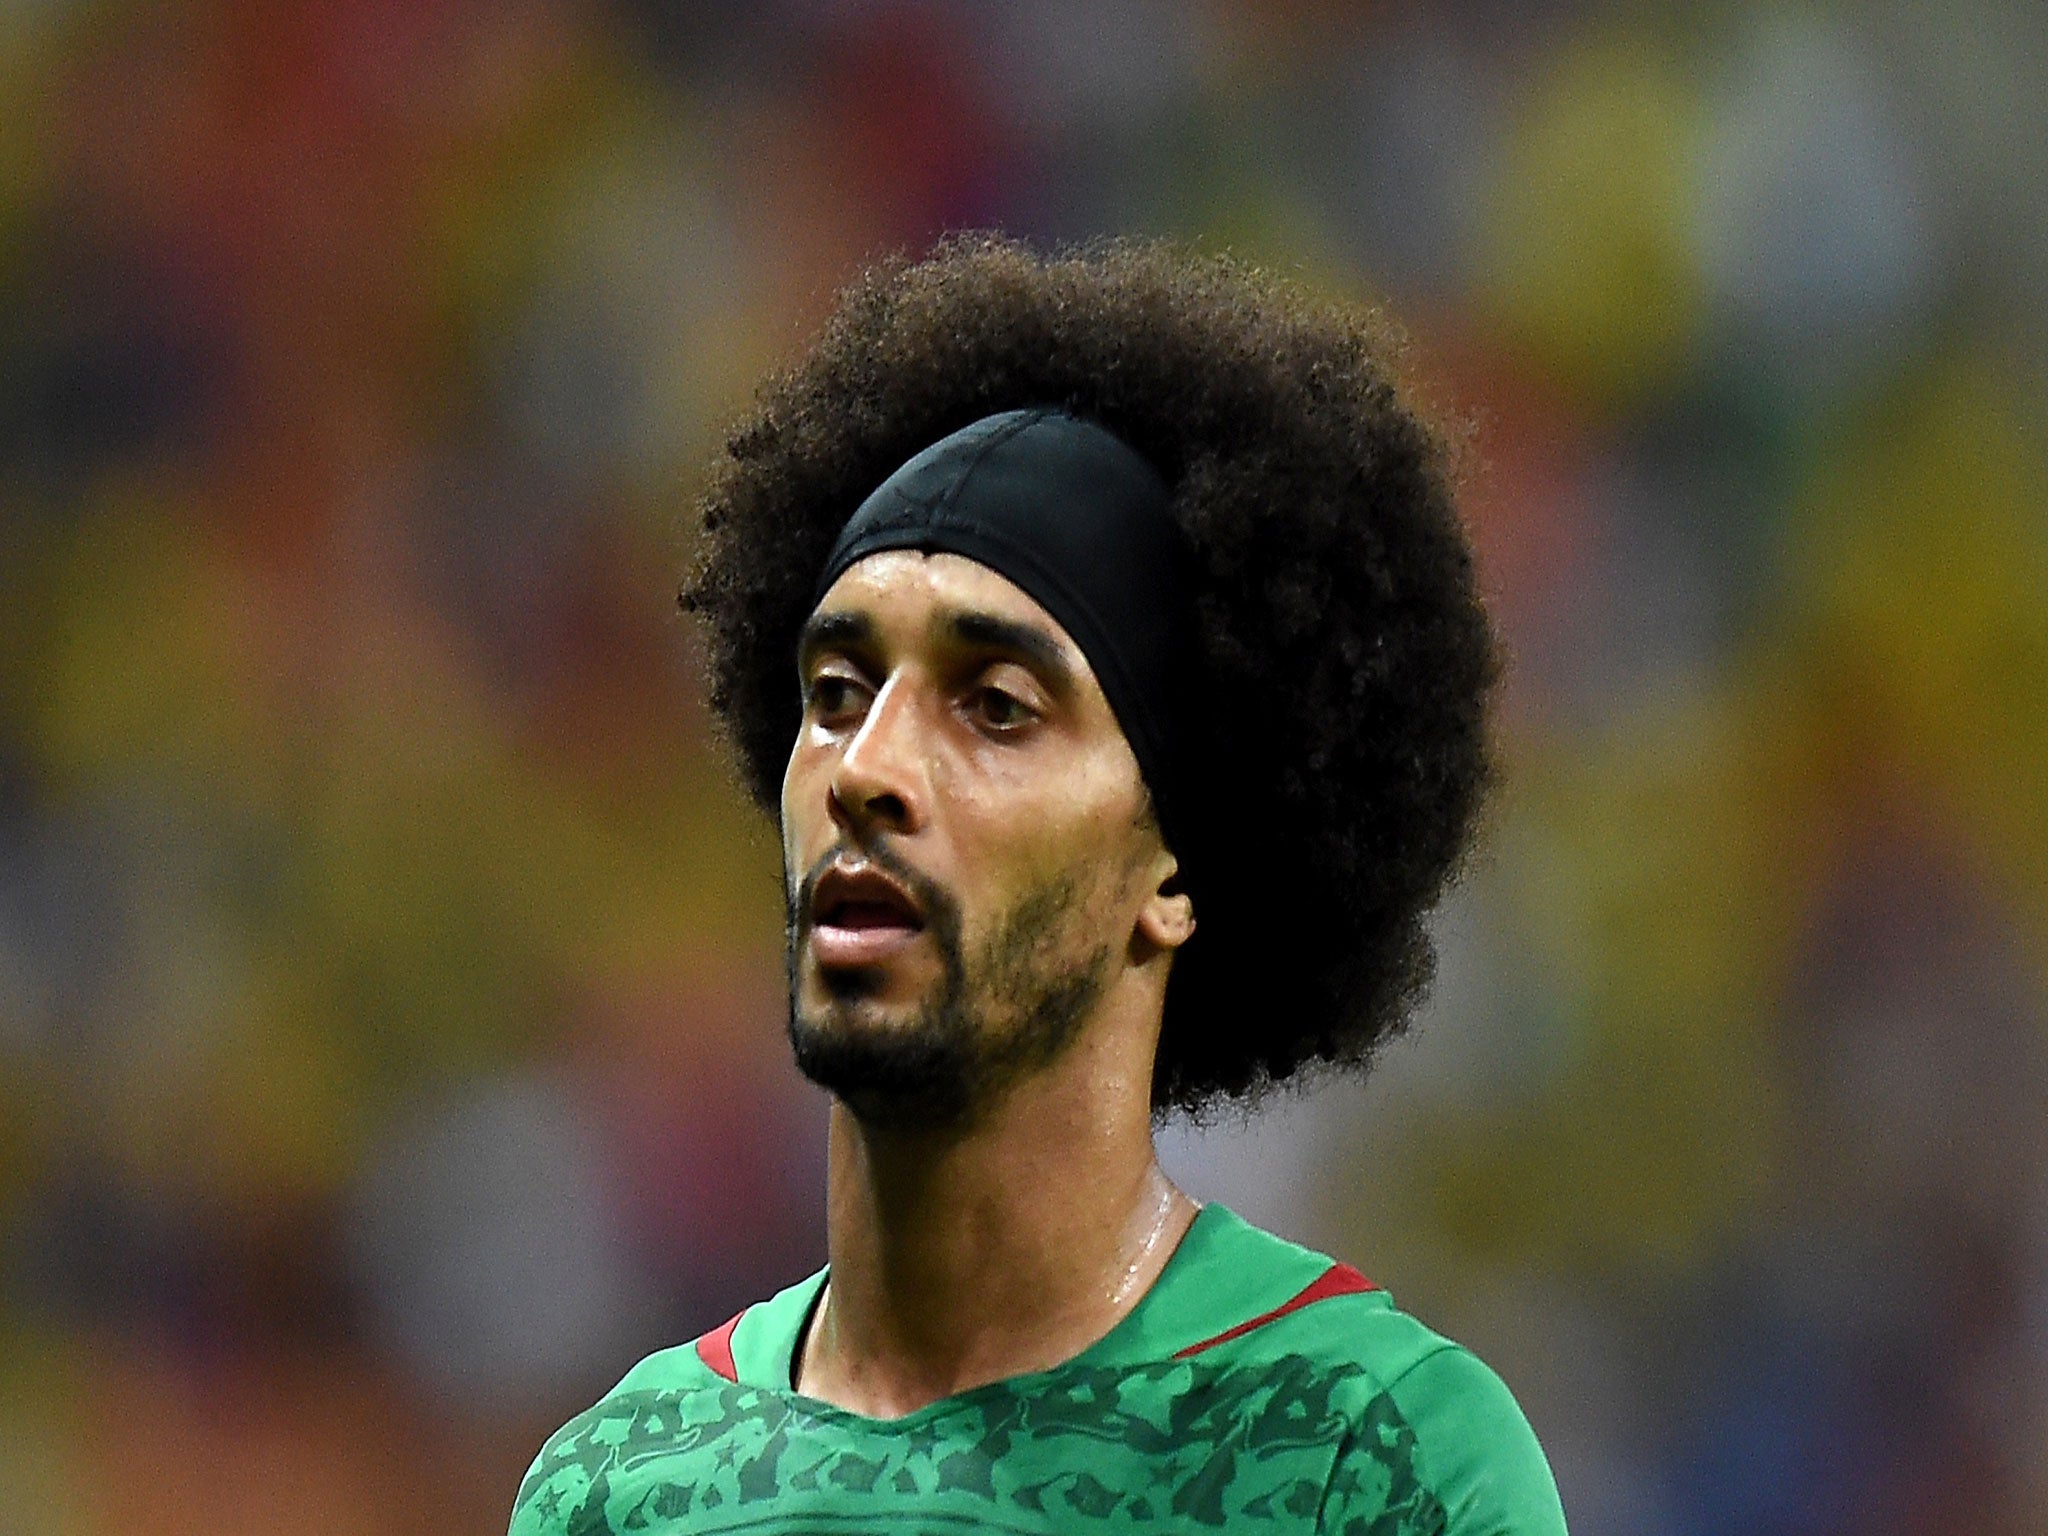 Benoit Assou-Ekotto was involved in an on-pitch fracas with his team-mate Benjamin Moukandjo